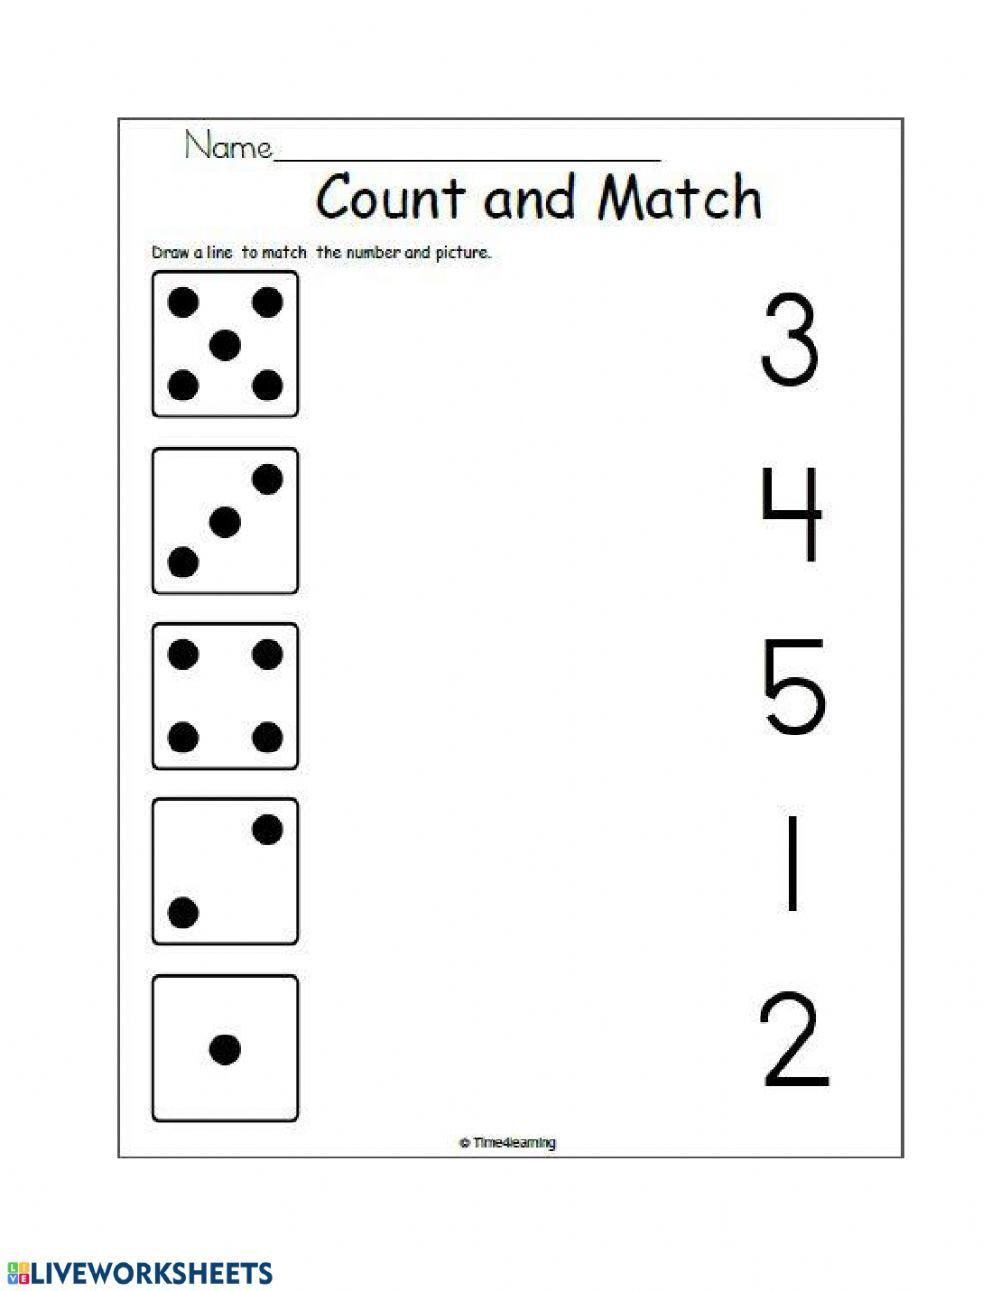 Matching numbers and quantities